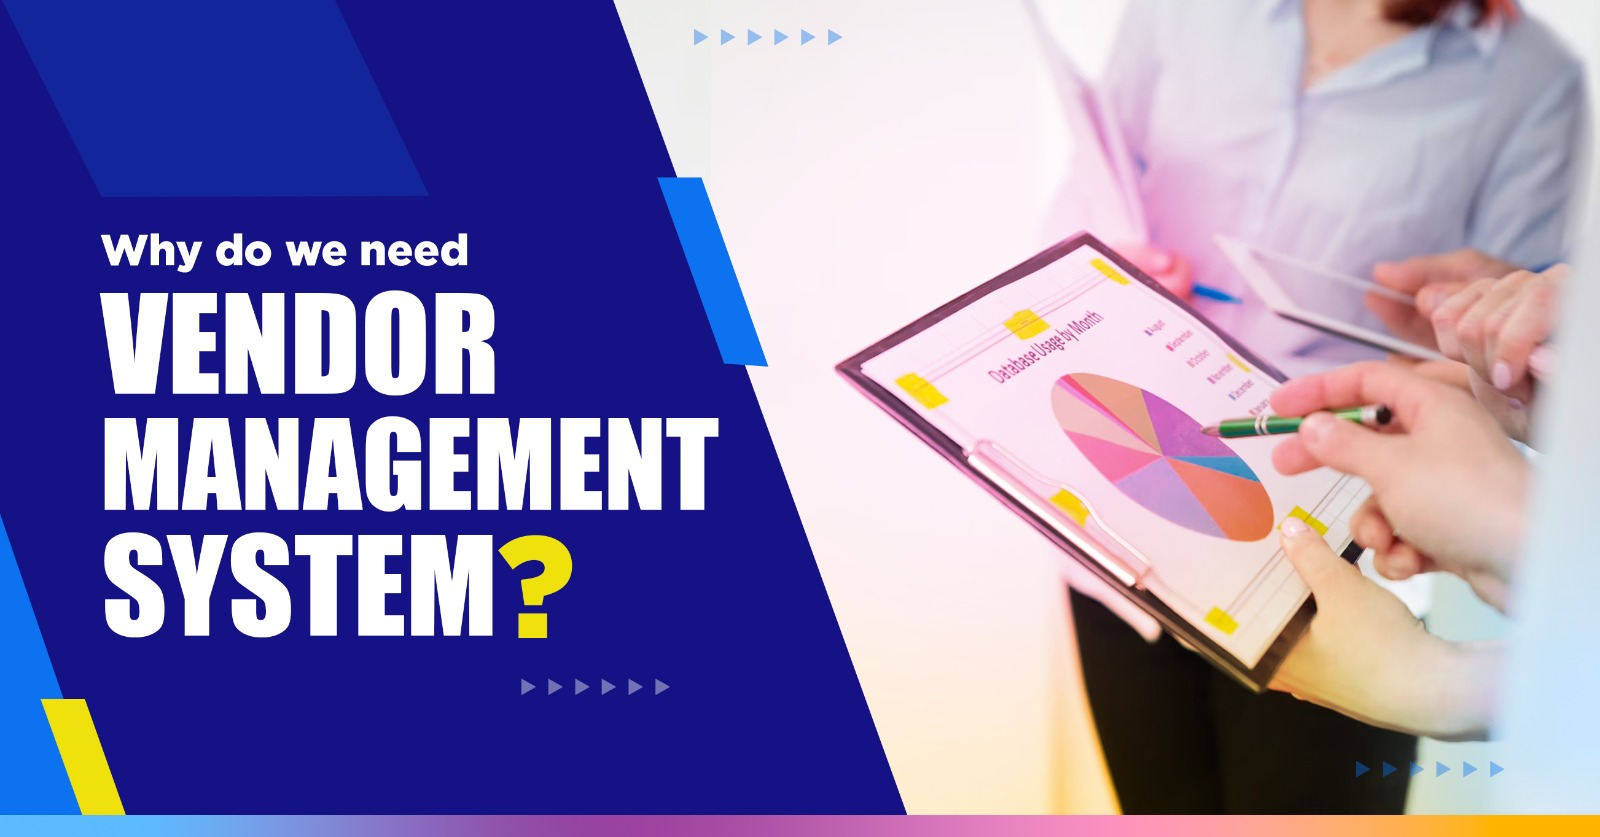 Why Do We Need Vendor Management System?